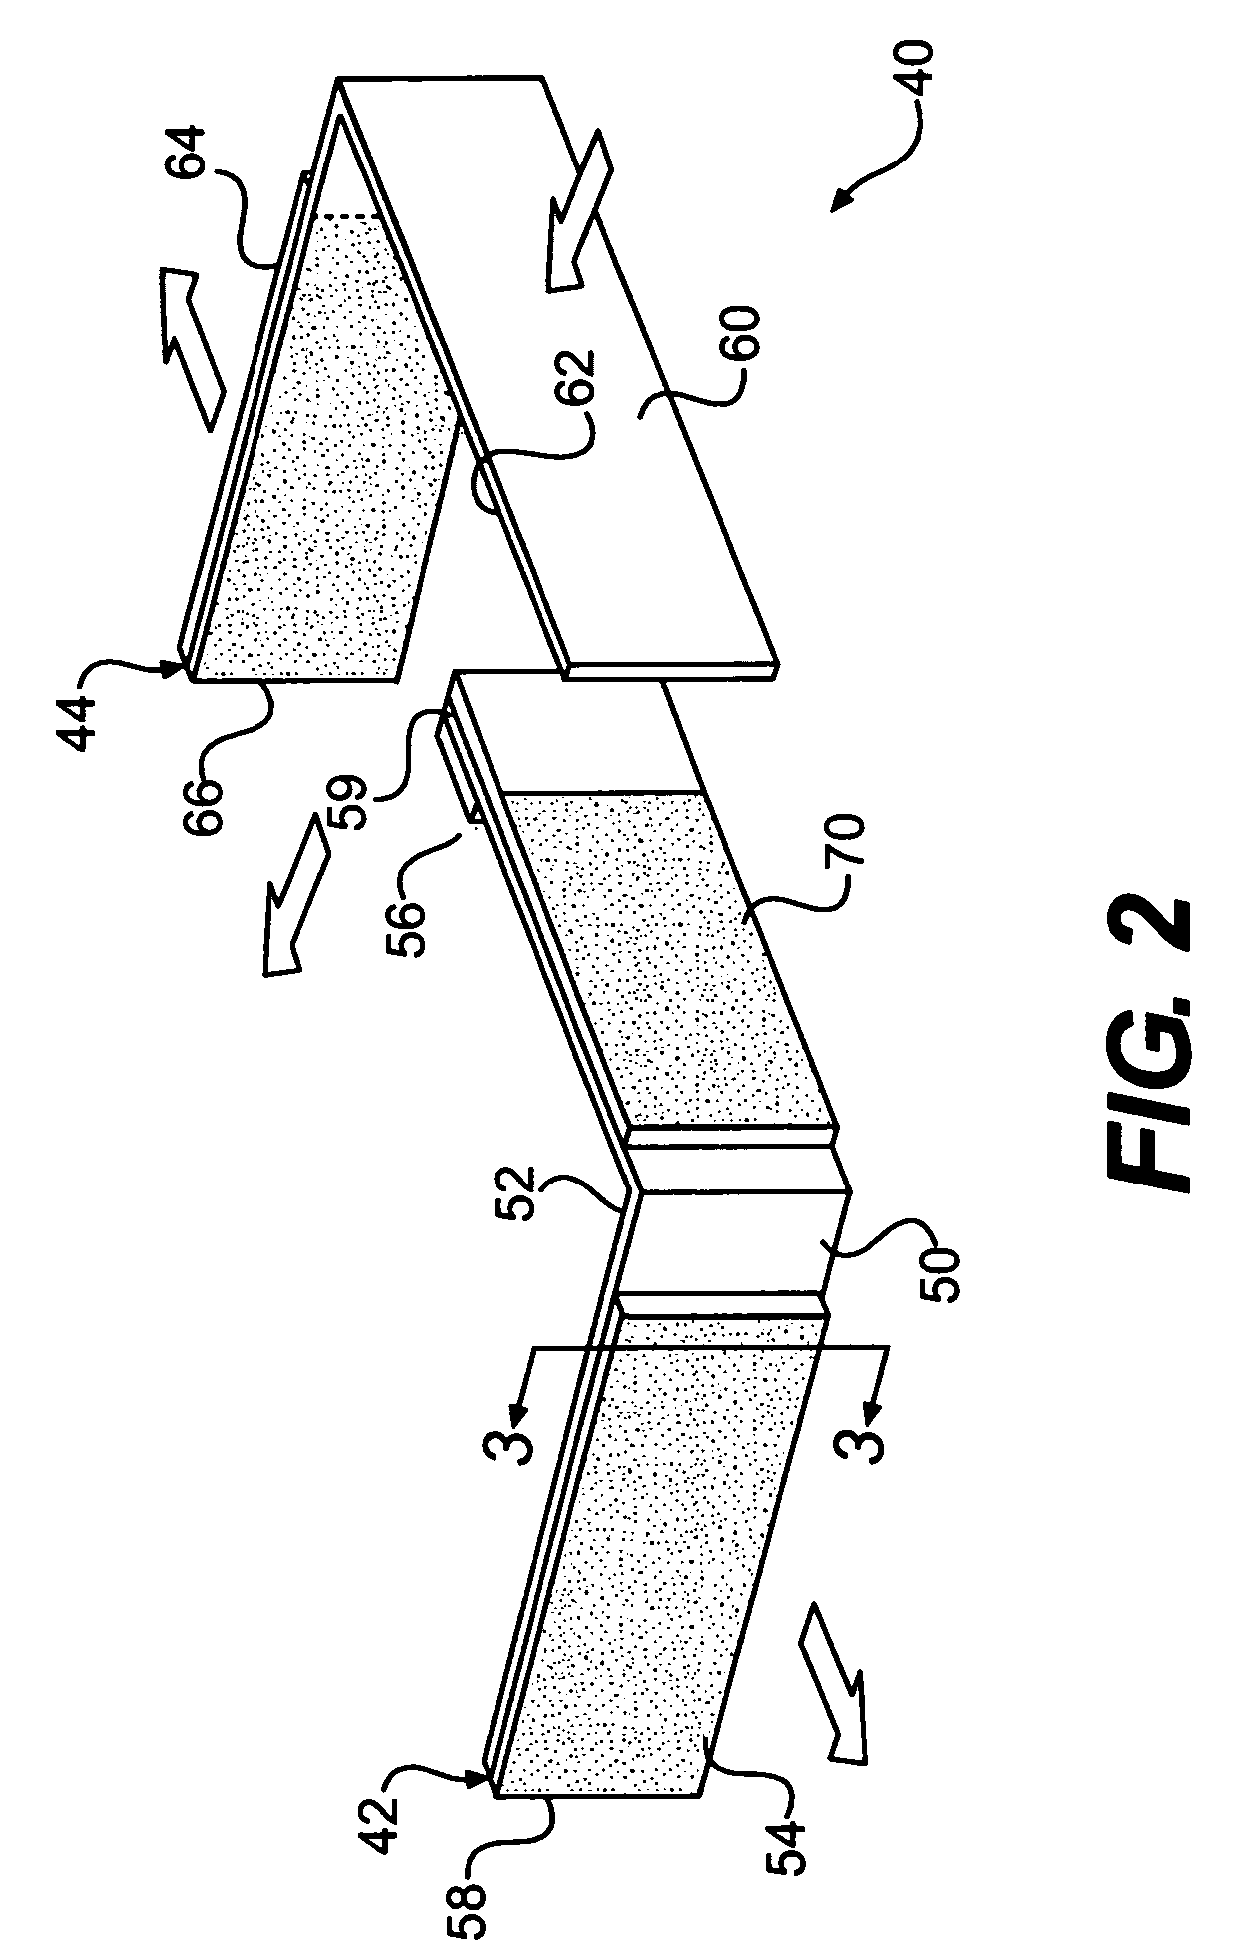 Overland cargo restraint system and method